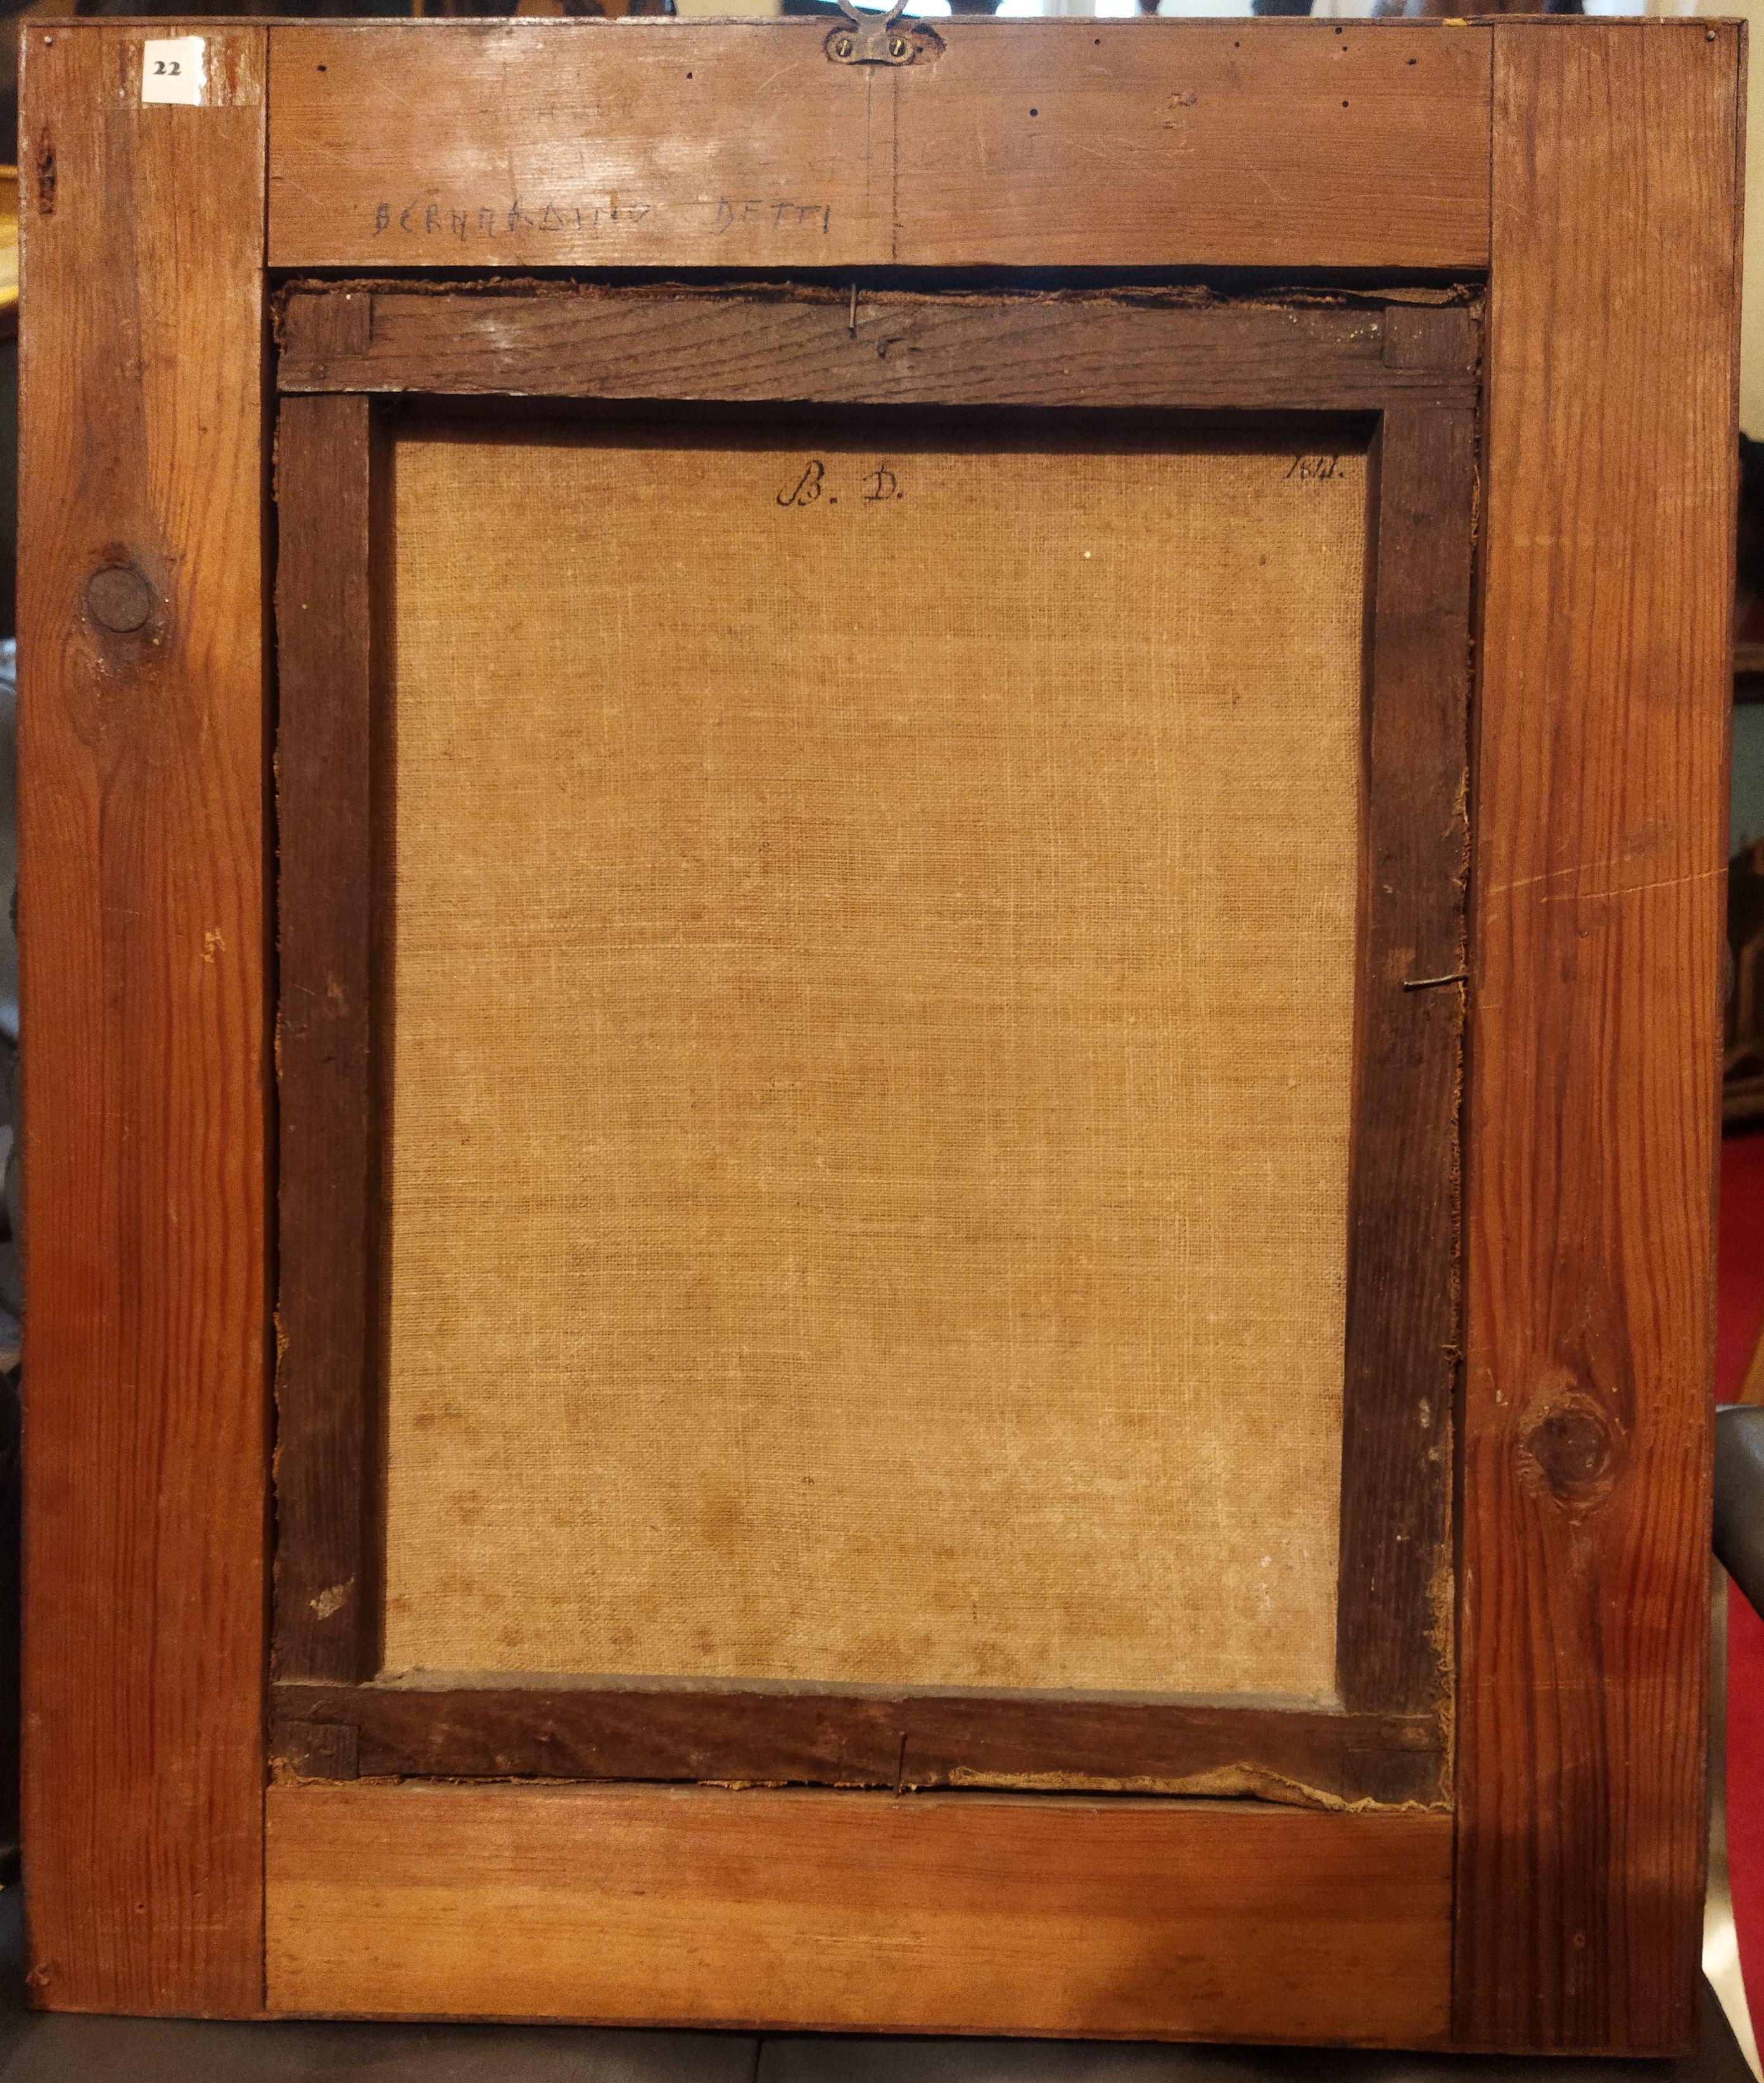 Dimensions: 41 x 32 cm without frame - 47 x 55.5 cm with frame

Antique box frame made of solid wood and walnut burl.

Publications: unpublished

The painting by Bernardino Detti (1498 - 1572) depicts the face of Jesus Christ, framed centrally in